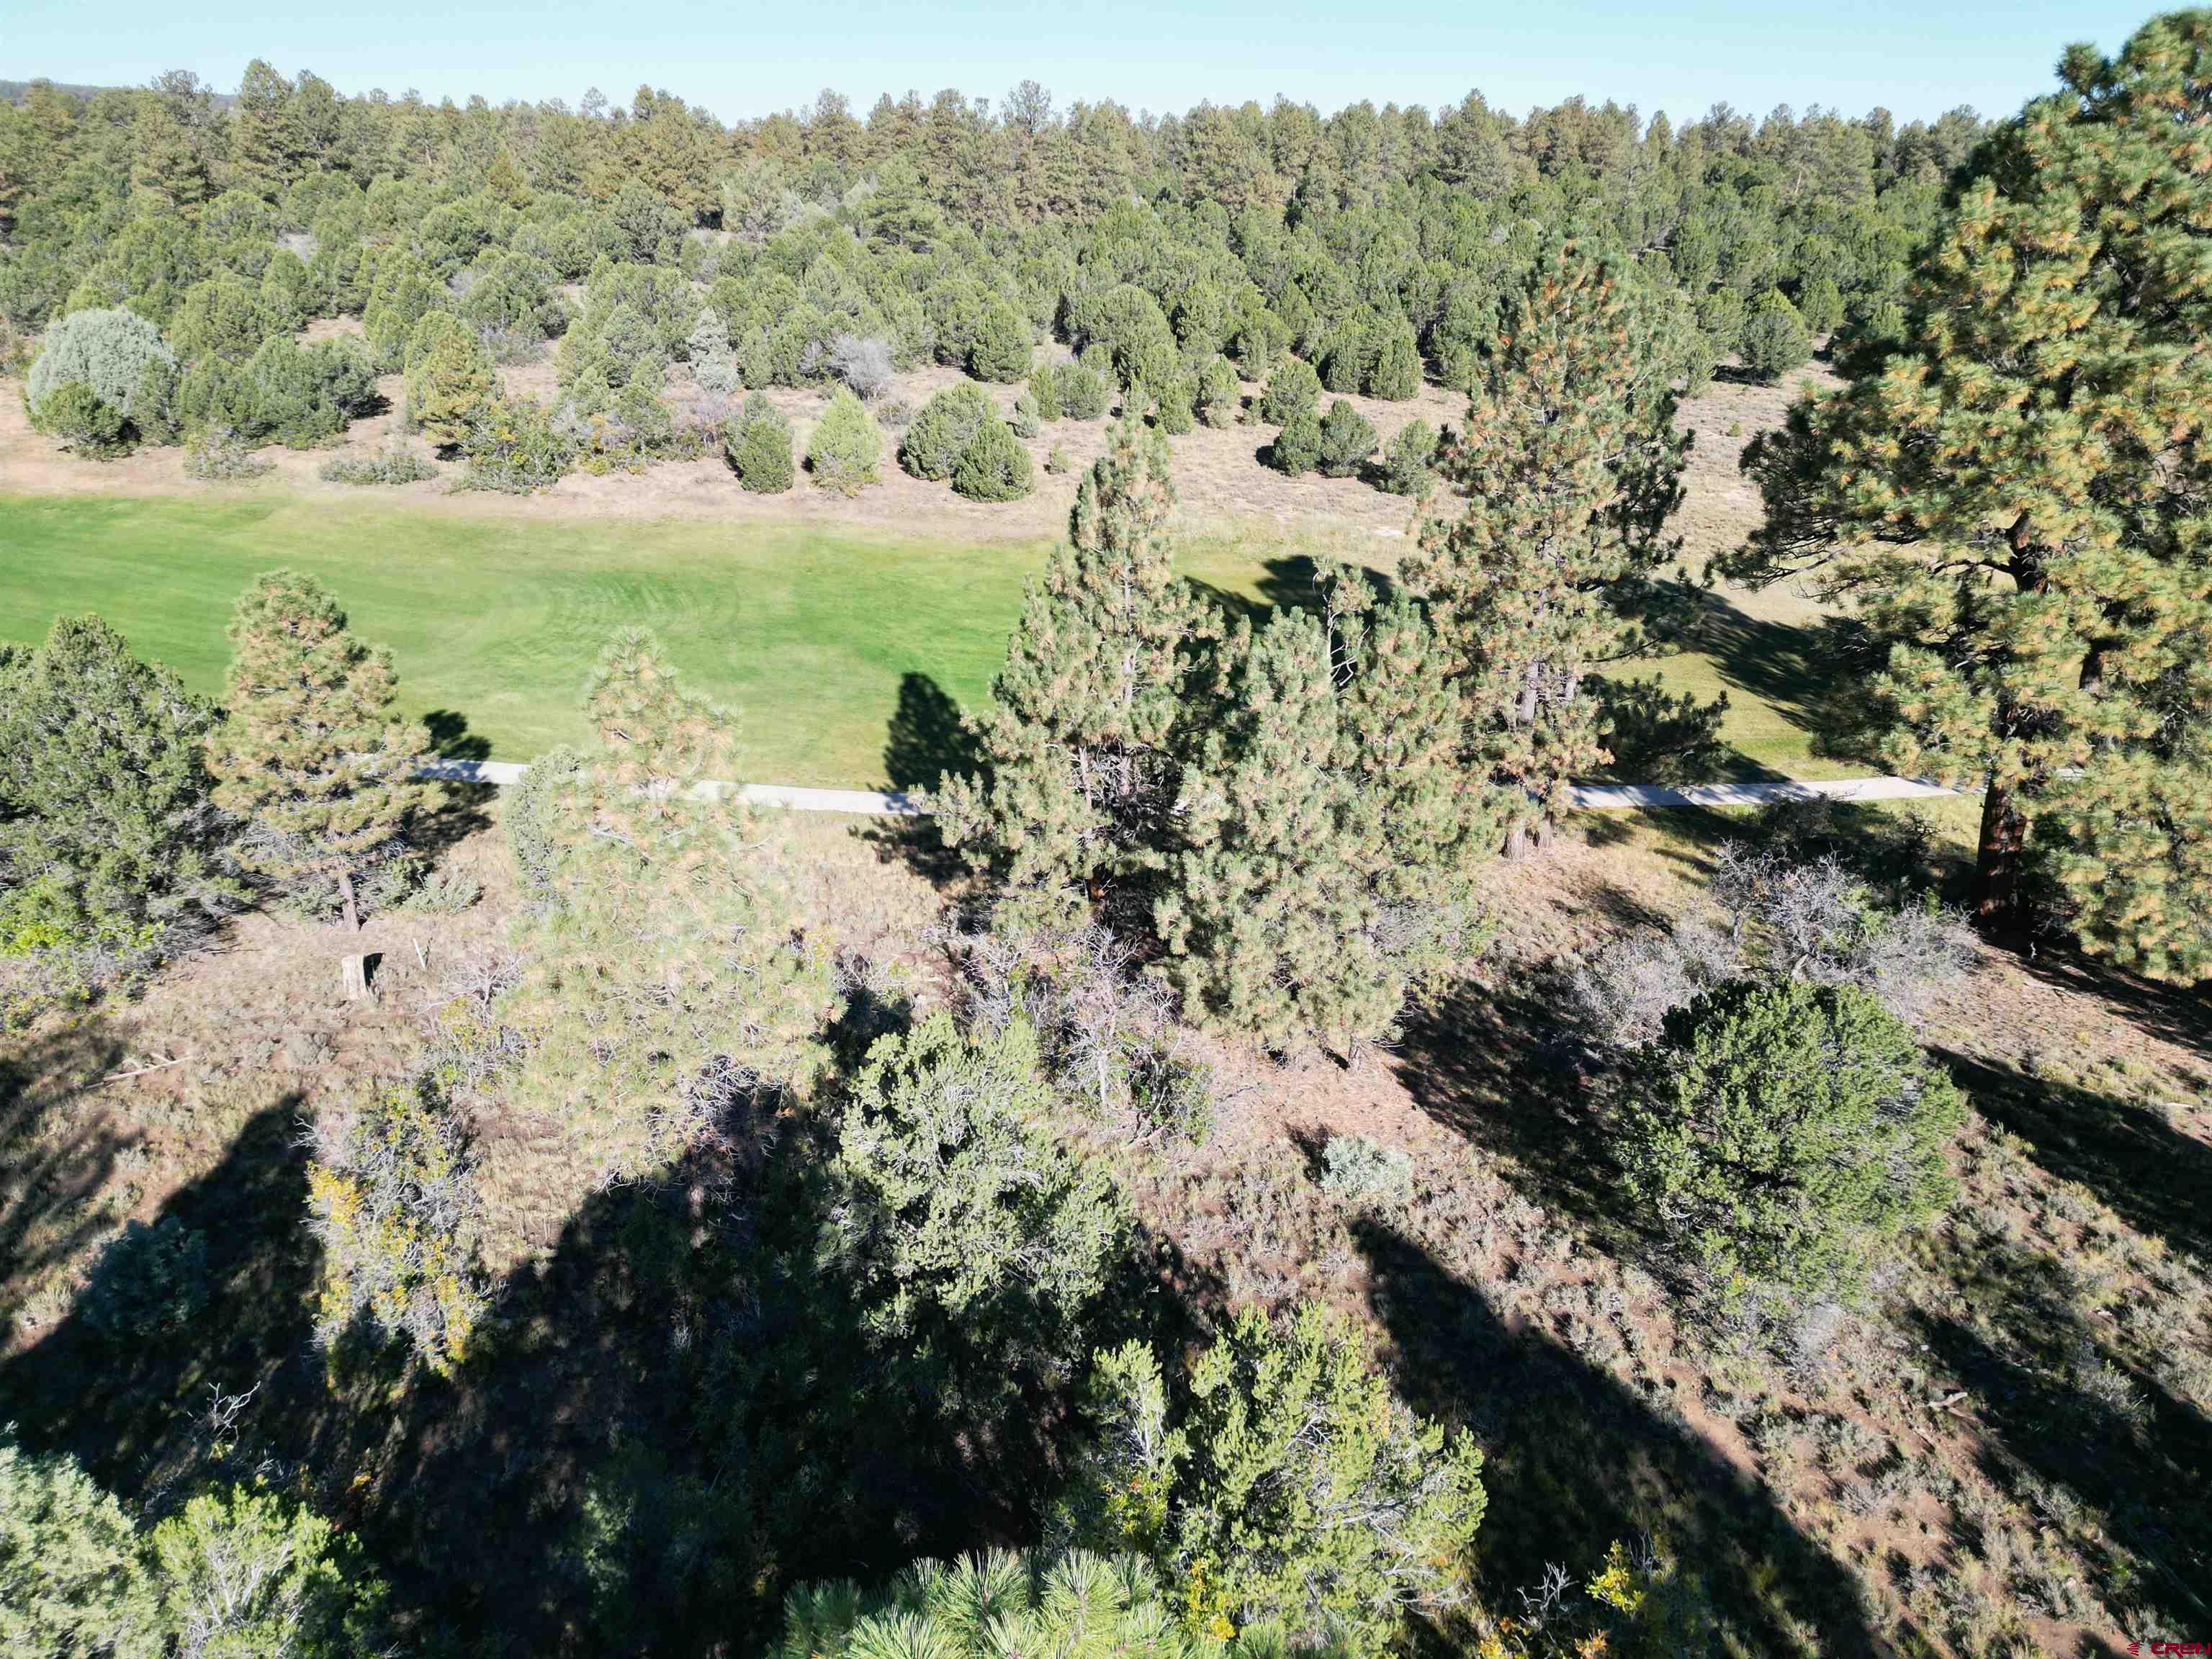 Escape to Divide Ranch & Club and enjoy all that this community has to offer with this amazing 0.949 acre lot. This golf course frontage lot is overlooking the 17th fairway of the Divide 18 hole Award Winning Golf Course with its 8,600 square foot clubhouse. Design and build your Colorado golf retreat on this beautiful lot with Ponderosa Pines and views of the surrounding mountain ranges. Located less than 8 miles to historic Ridgway known as the "Gateway to the San Juans" and where the original "True Grit" and "How the West was Won" movies were filmed. Other nearby attractions are Ouray which is known as the "Switzerland of America" and offers many hot springs for people to enjoy is just 10 miles away. The popular town of Telluride is an easy commute, a little over 30 miles away to enjoy world class skiing and summers full of cultural events and outdoor activities. Montrose Regional Airport is just 30 minutes away making it accessible to everyone. This is one of only a few developer serviced lots which includes paid water and sewer taps. A one time mandatory membership initiation fee of $15,000 for the Divide Ranch & Club is due at time of closing.